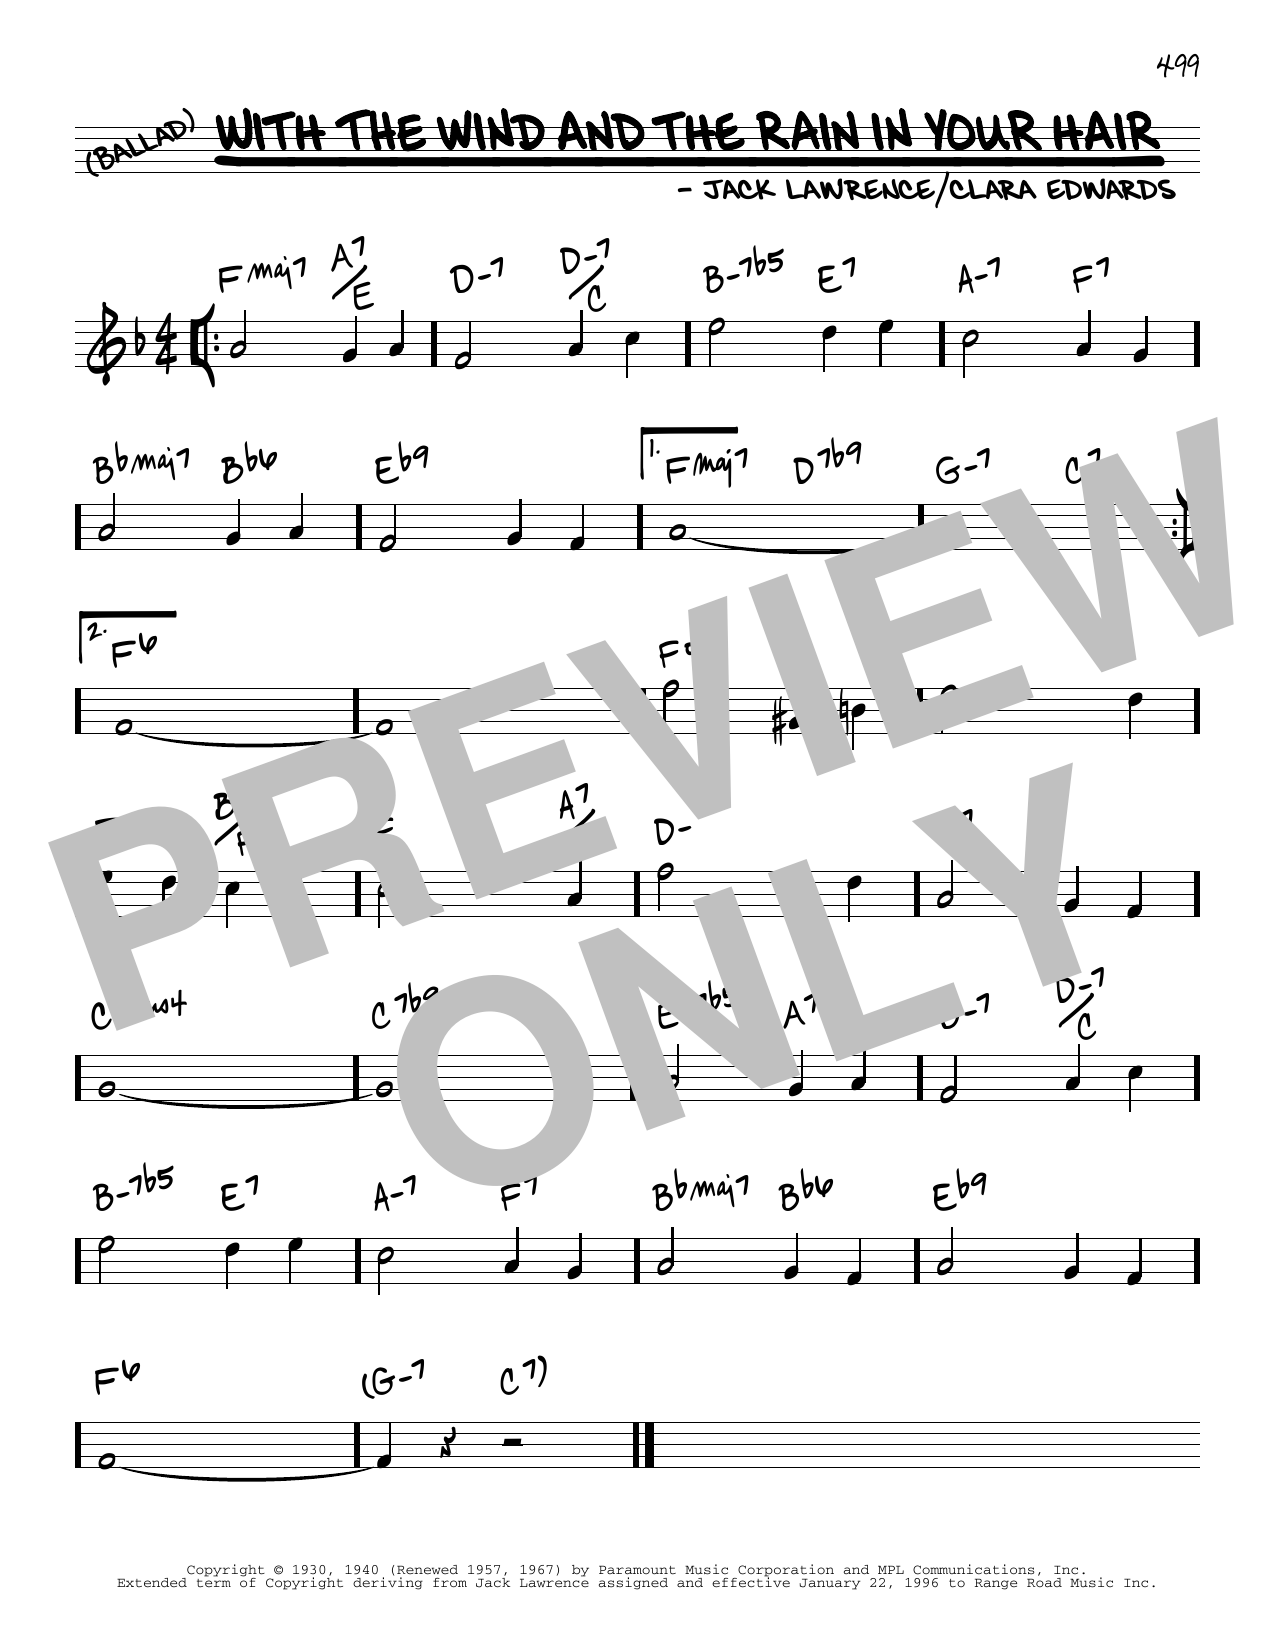 Download Pat Boone With The Wind And The Rain In Your Hair Sheet Music